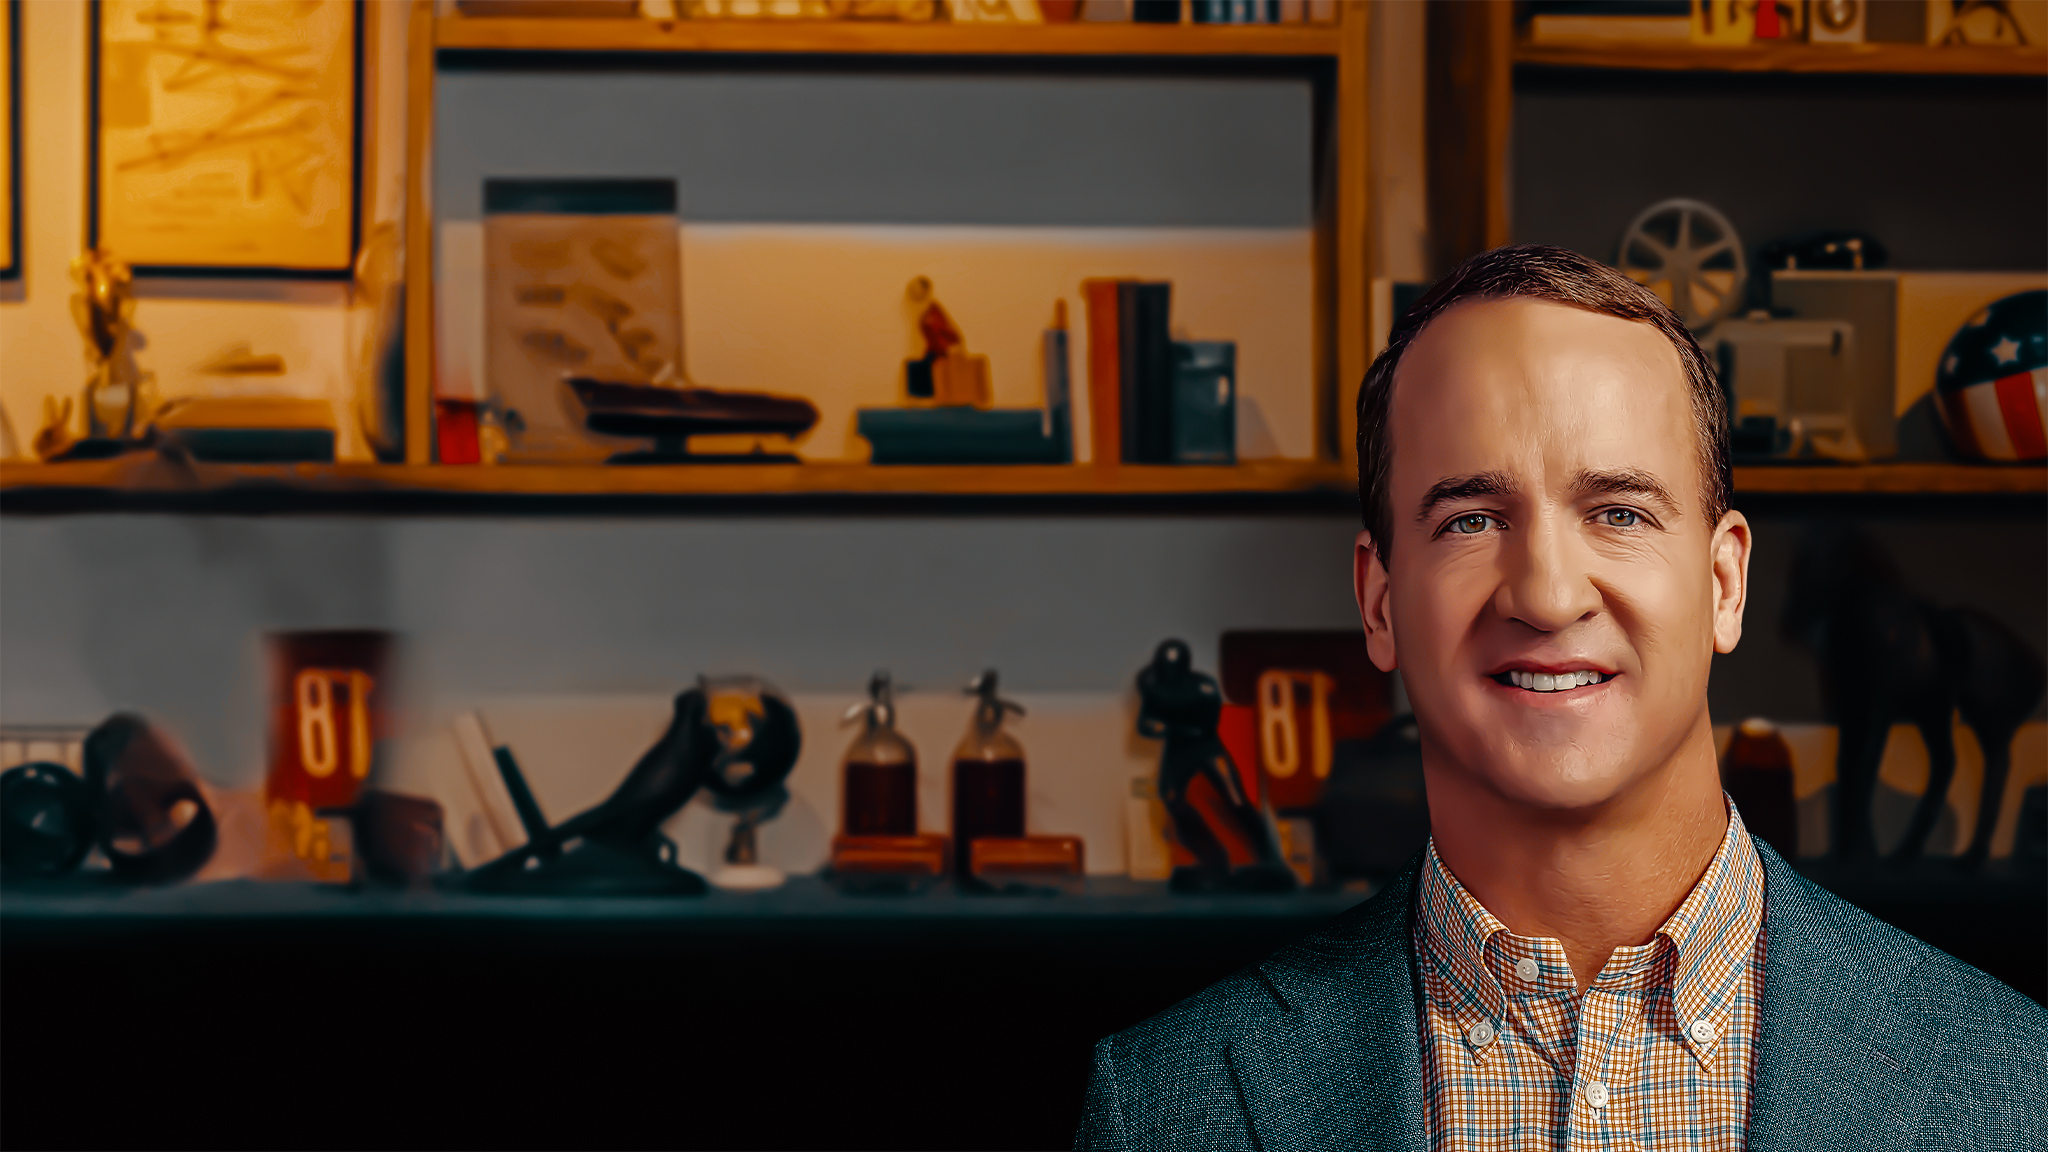 History’s Greatest of All Time with Peyton Manning